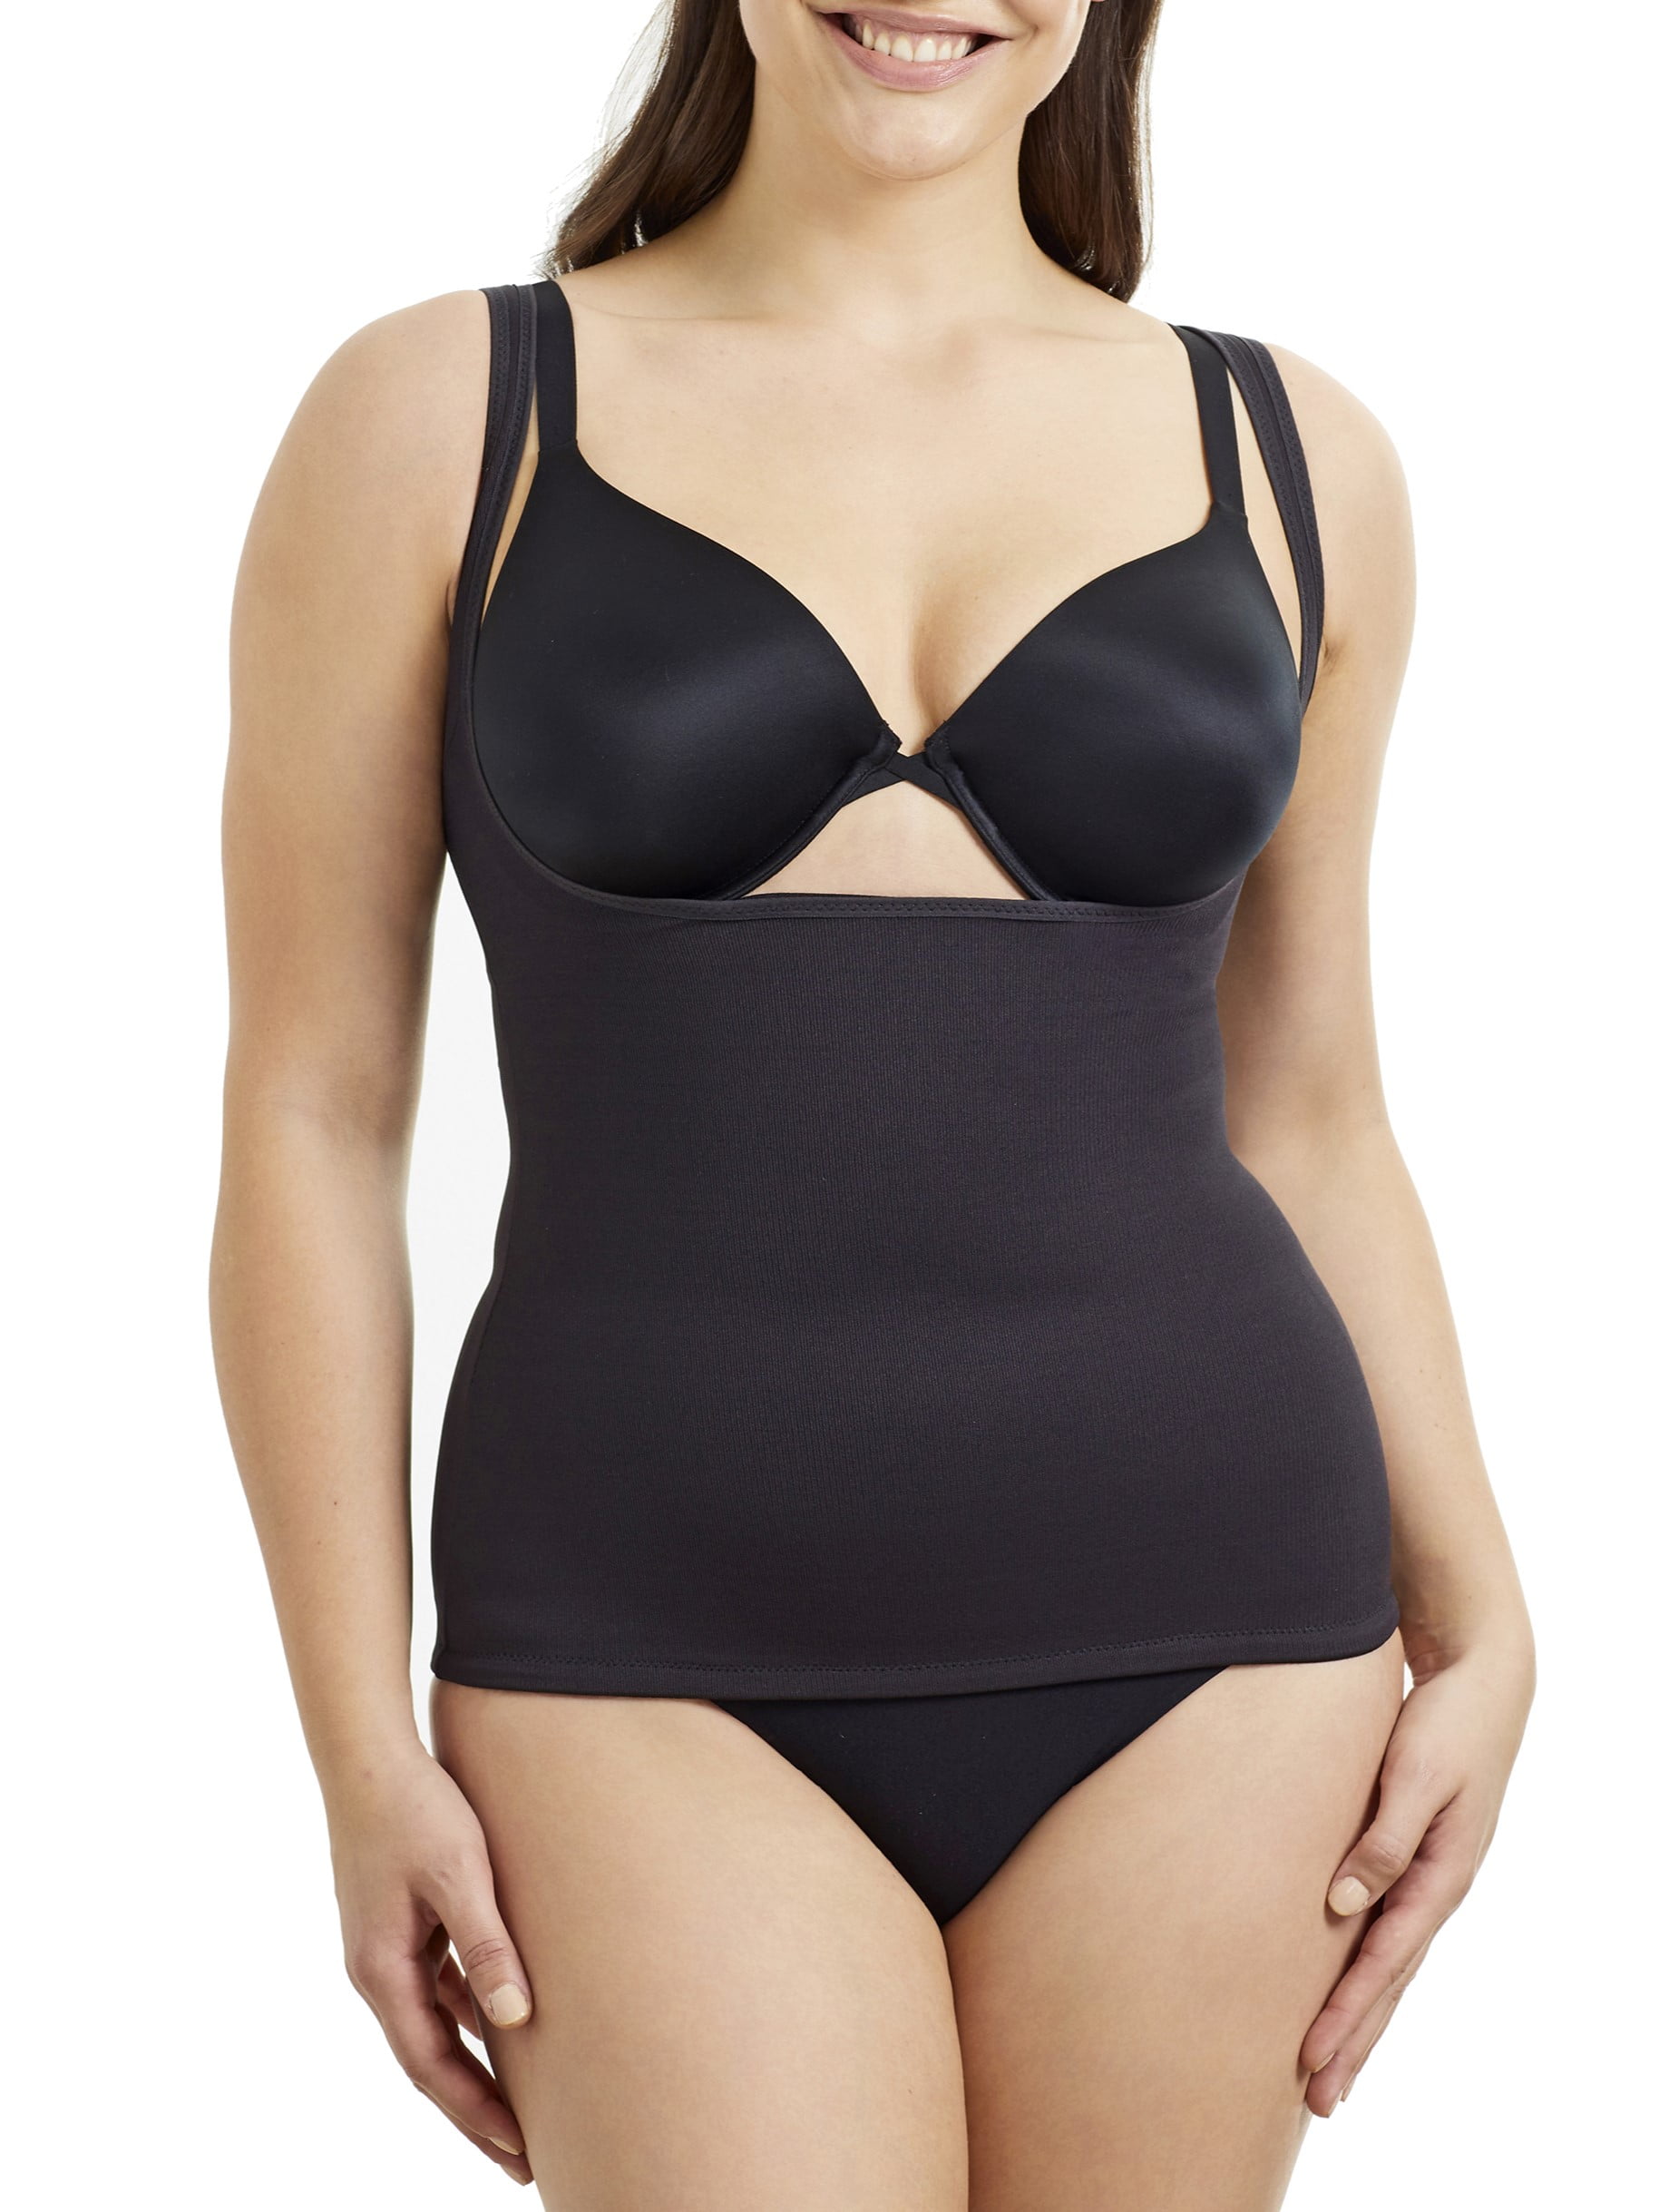 Tips For Exploring The Best Brand Of Wholesale Shapewear - Tamara